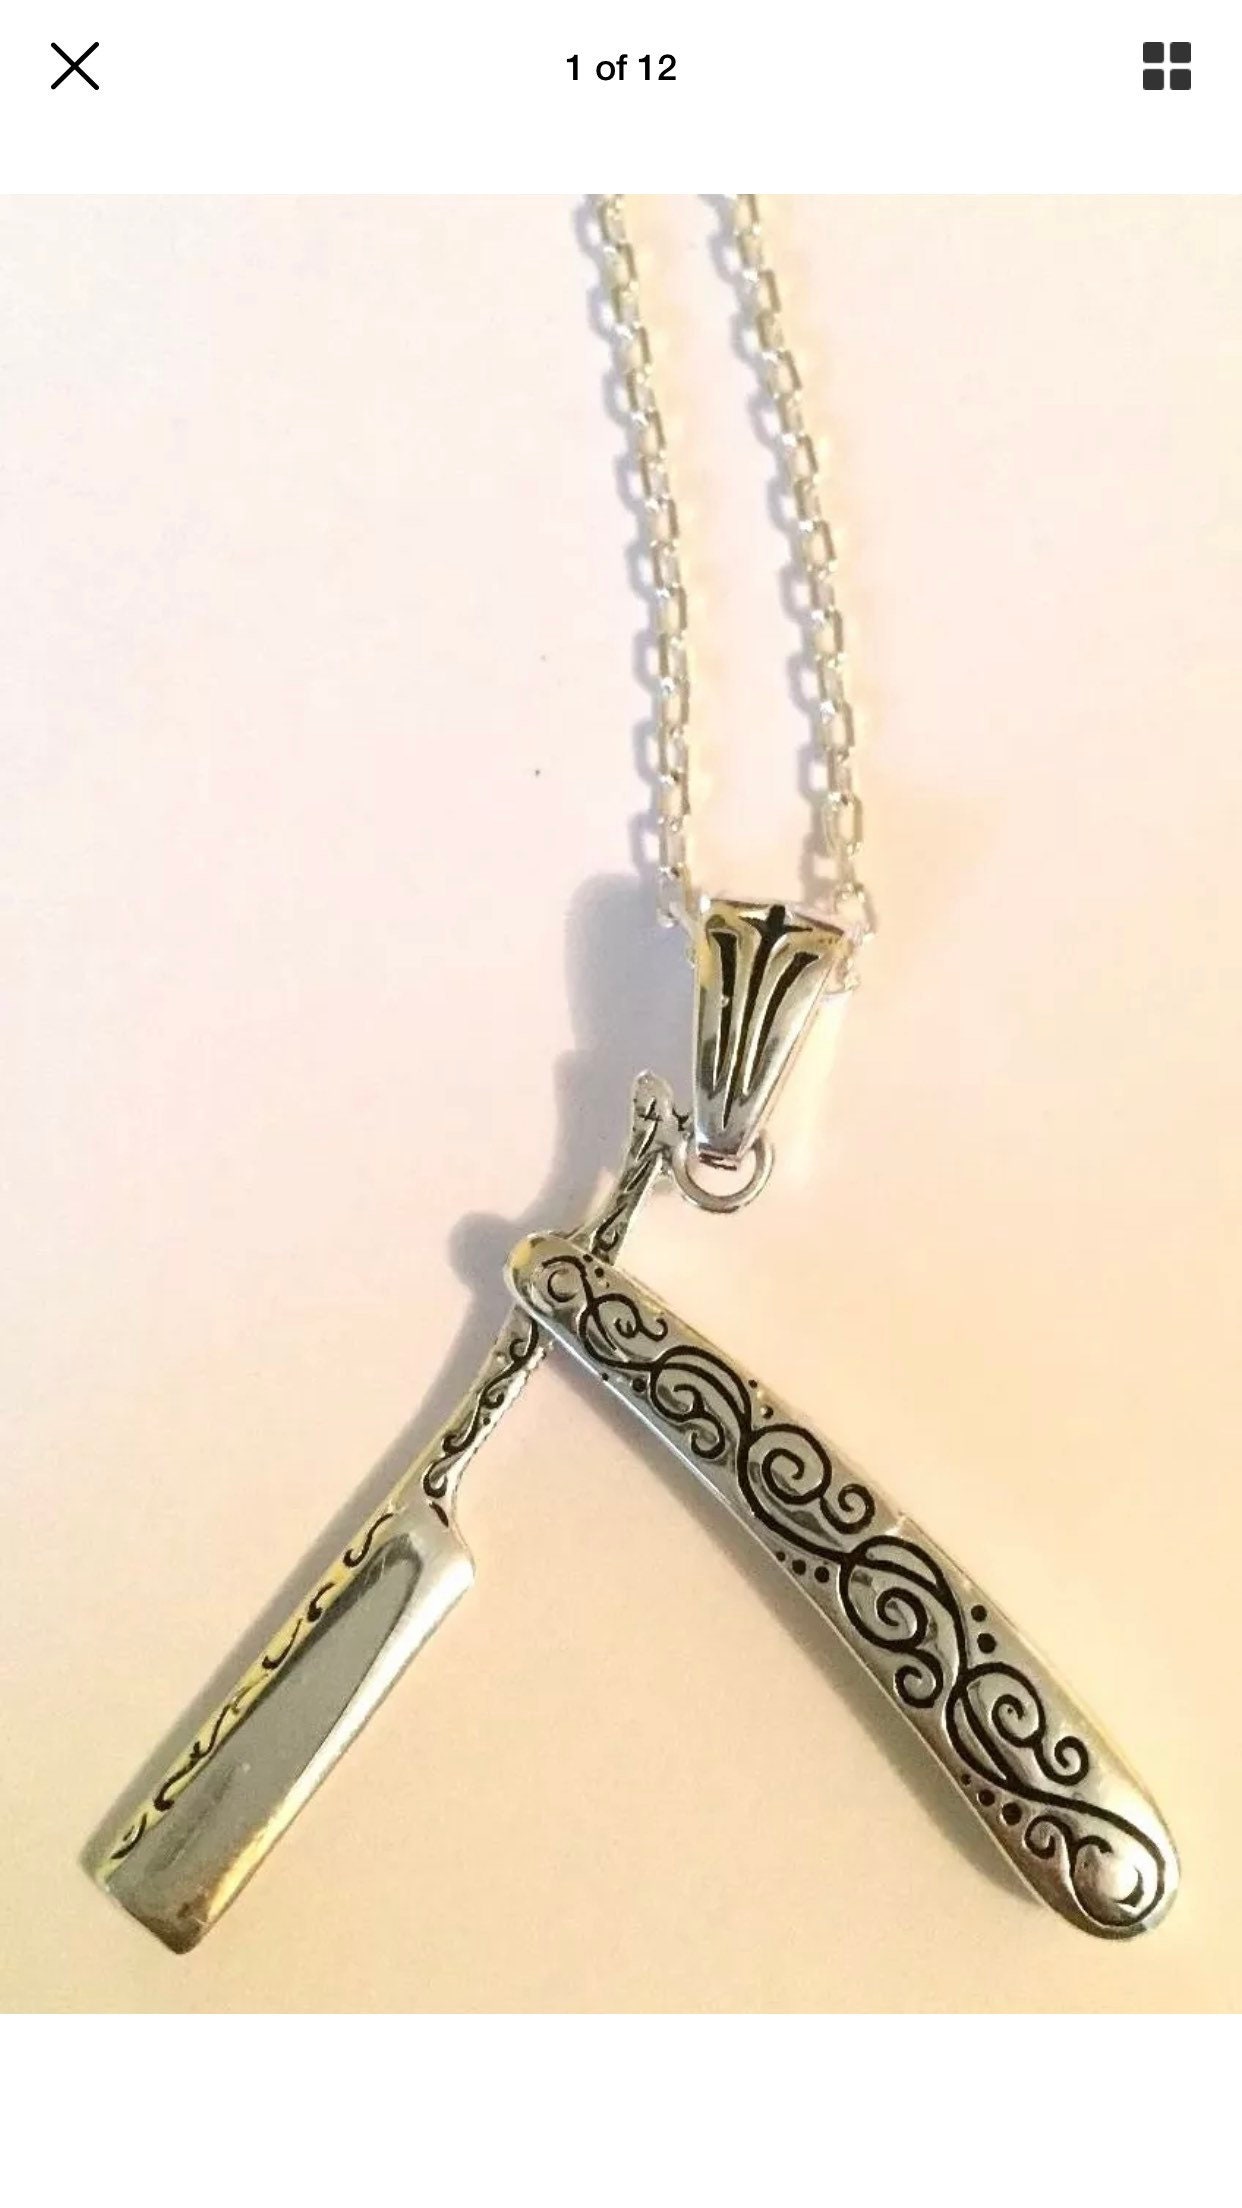 BX BARBER RAZOR BLADE NECKLACE W/ CHAIN - SILVER FINISHED – True Barber  Supply